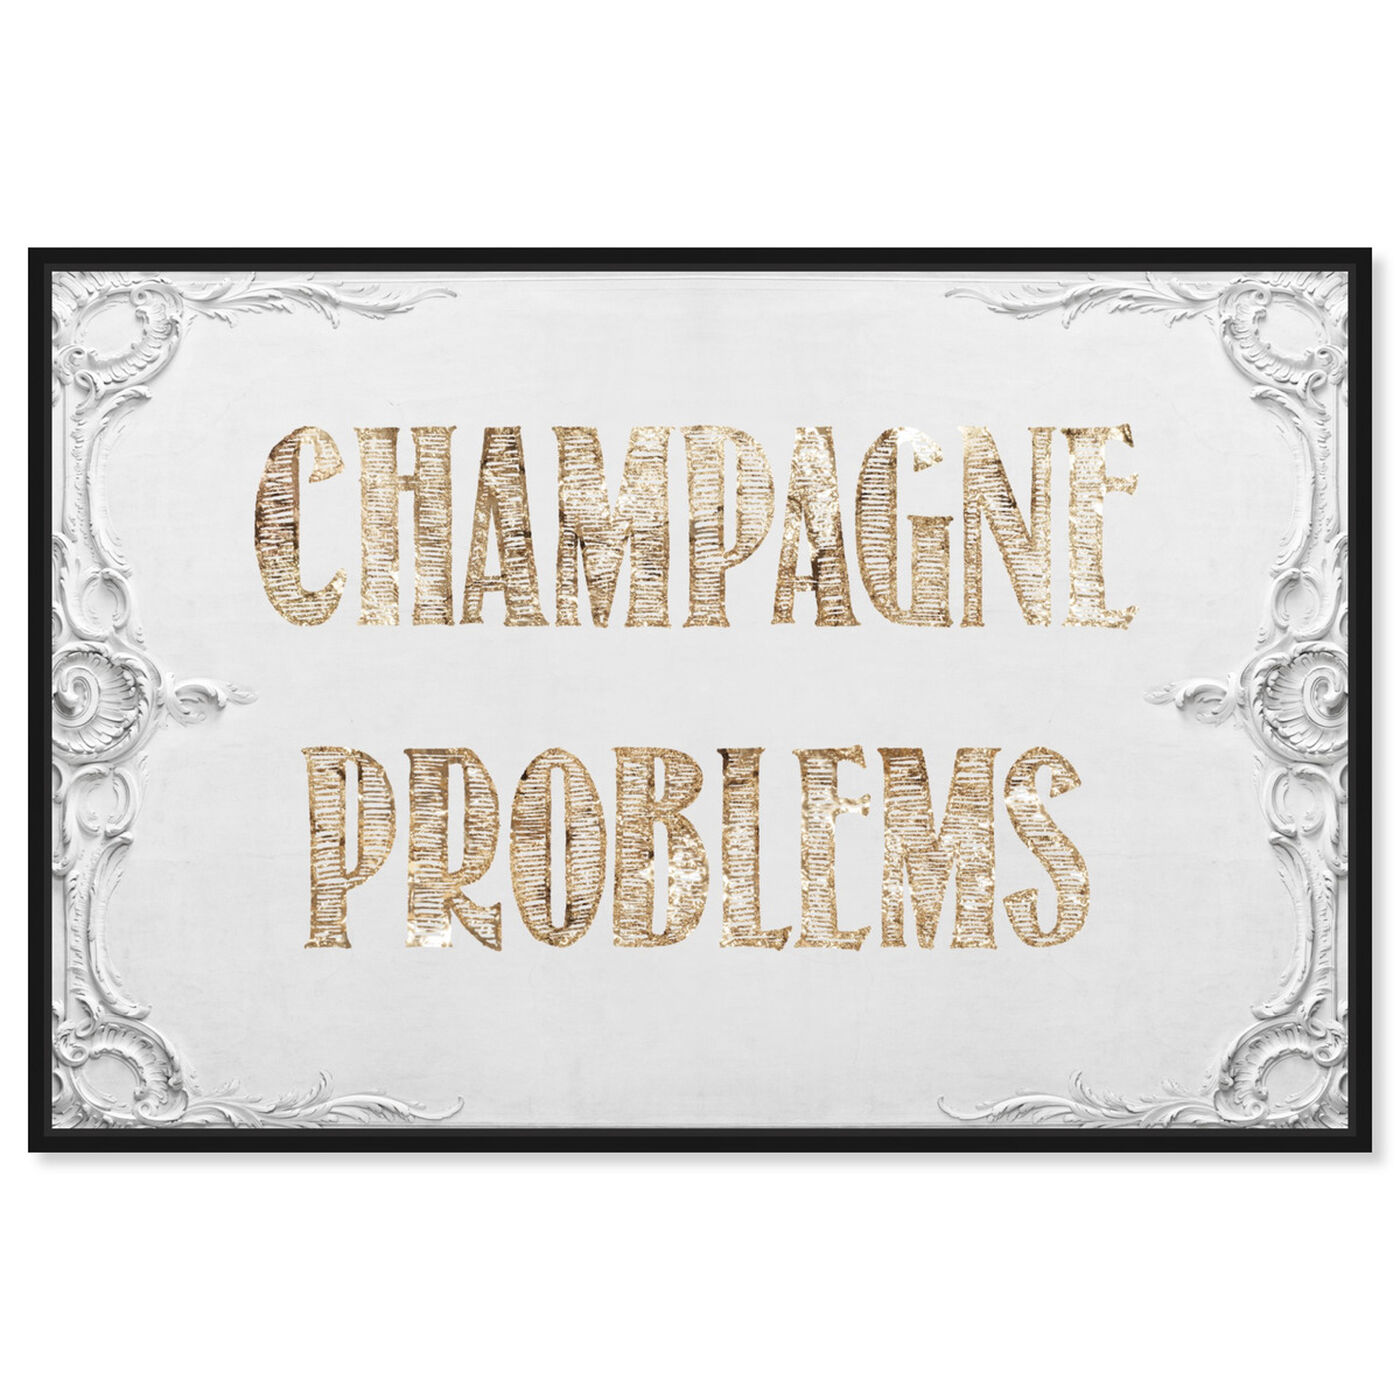 Champagne problems